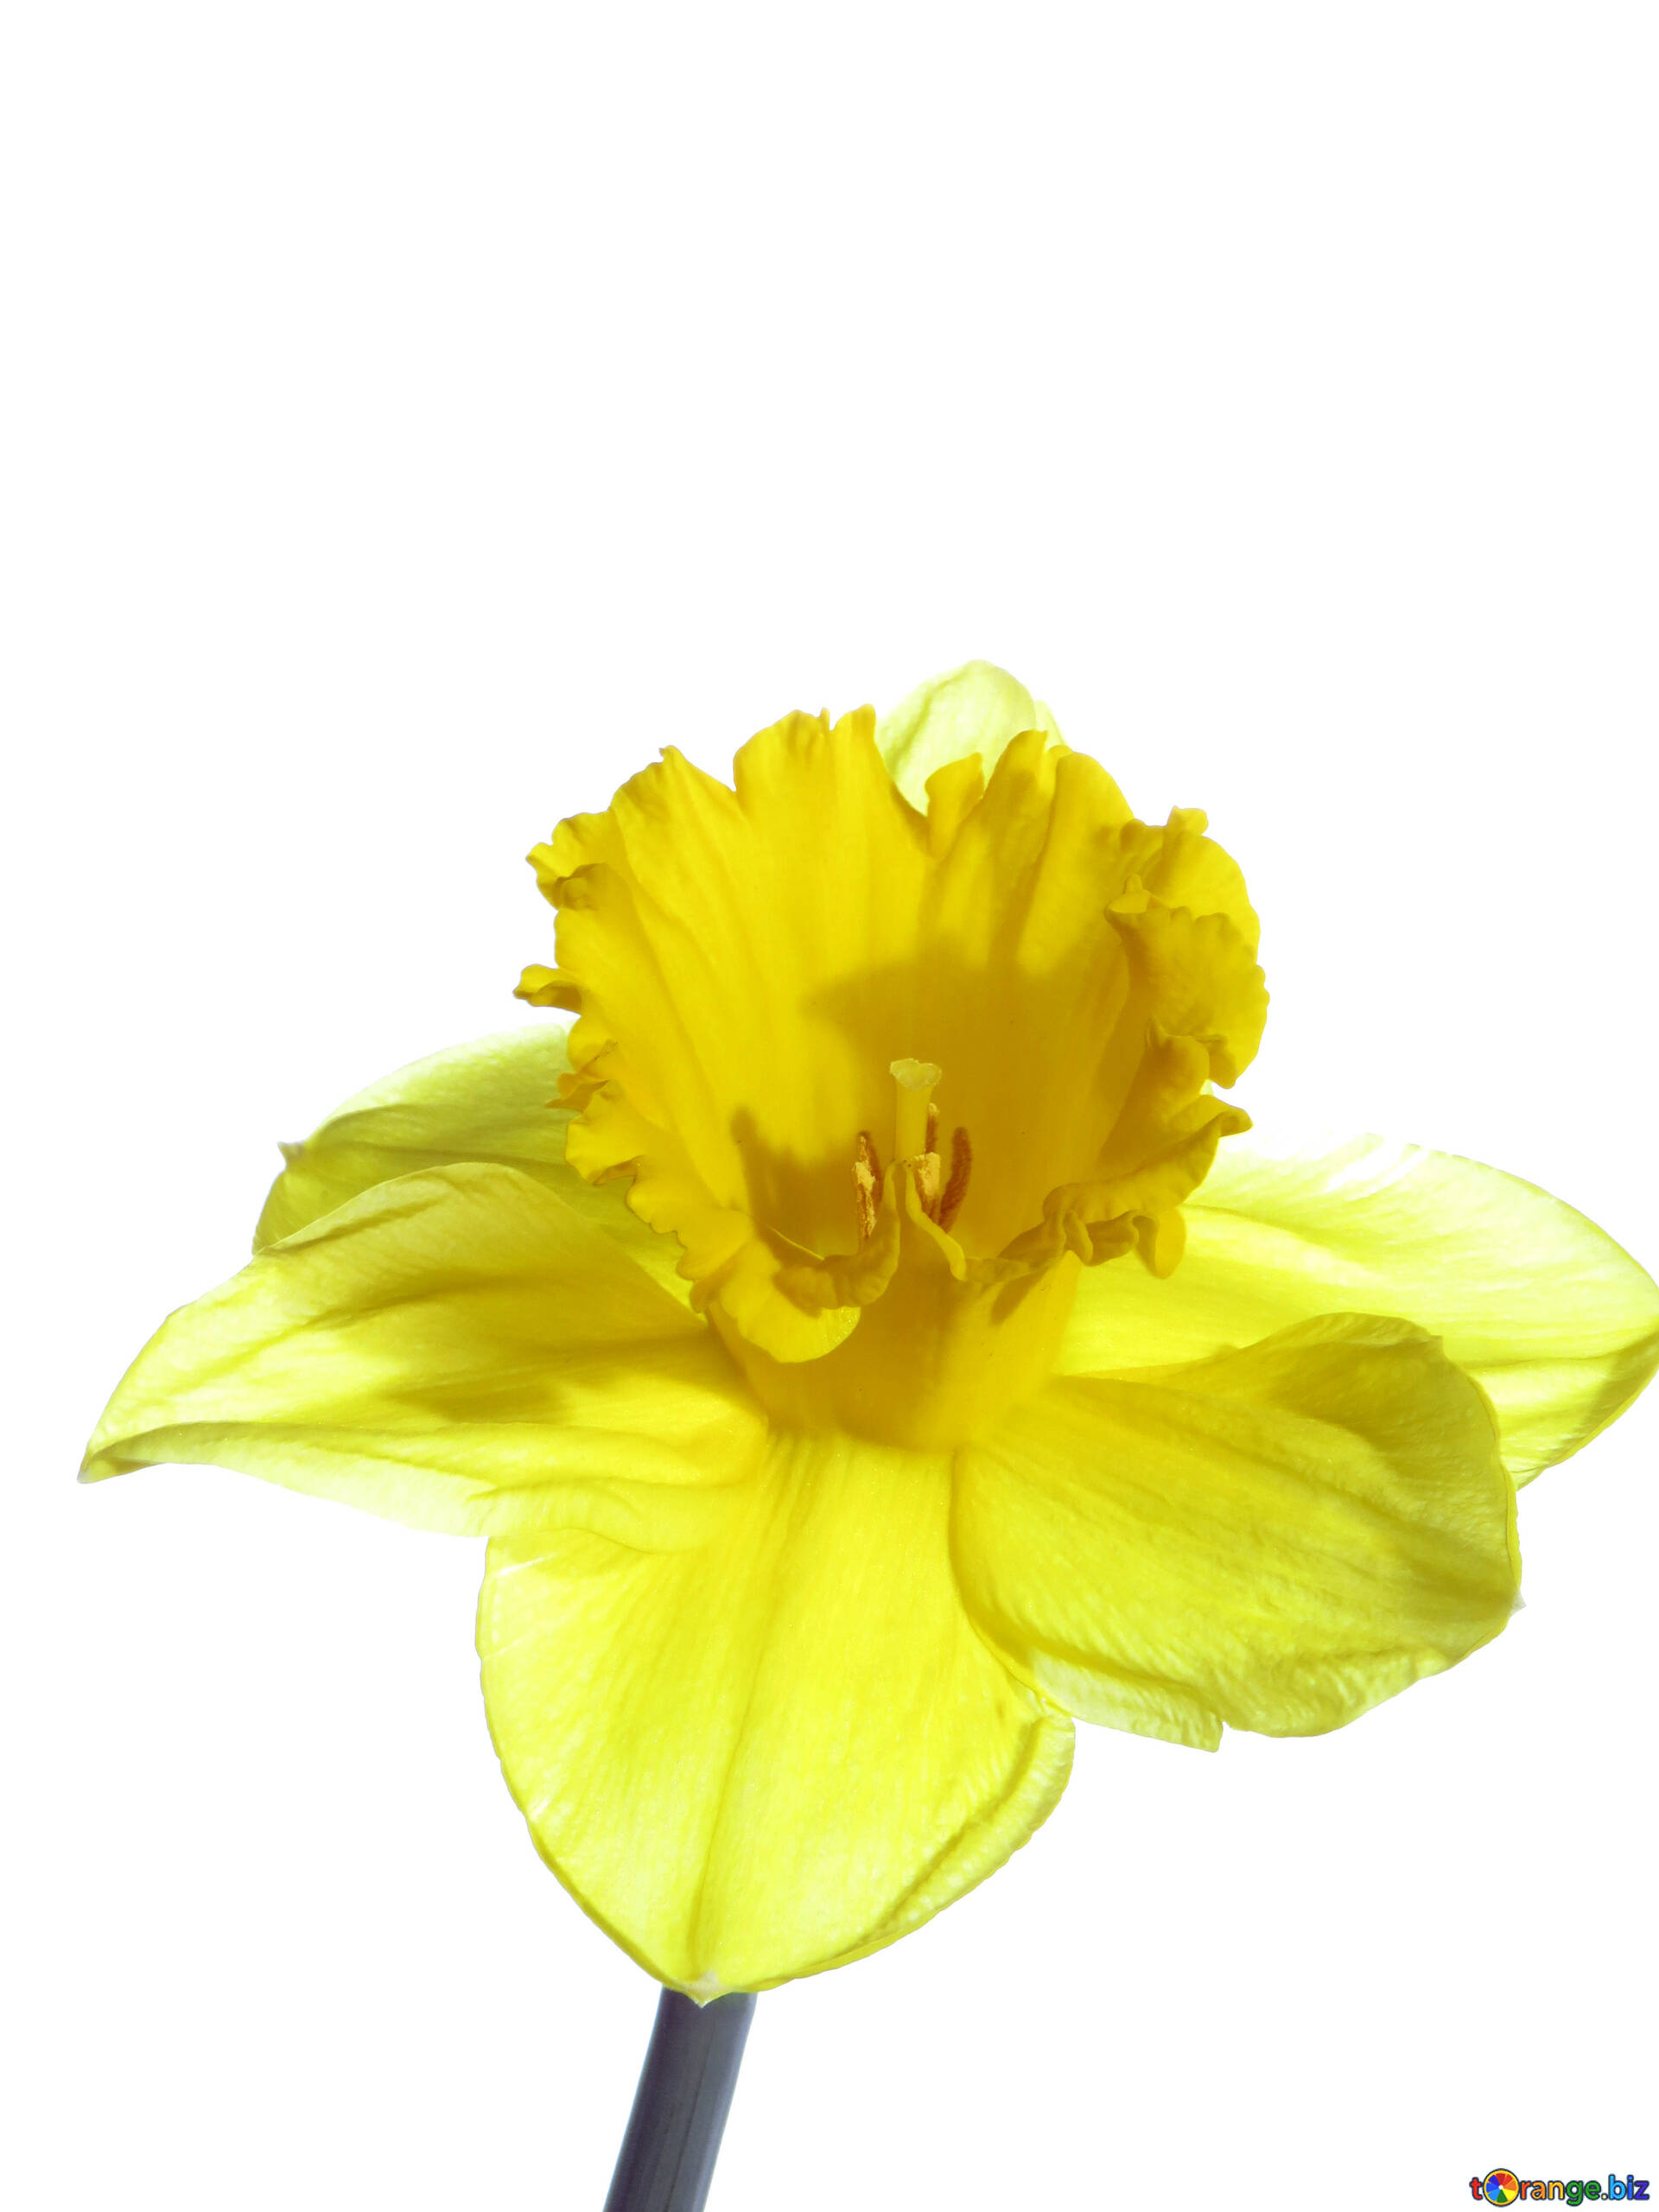 Narcissus isolated free image - № 30949